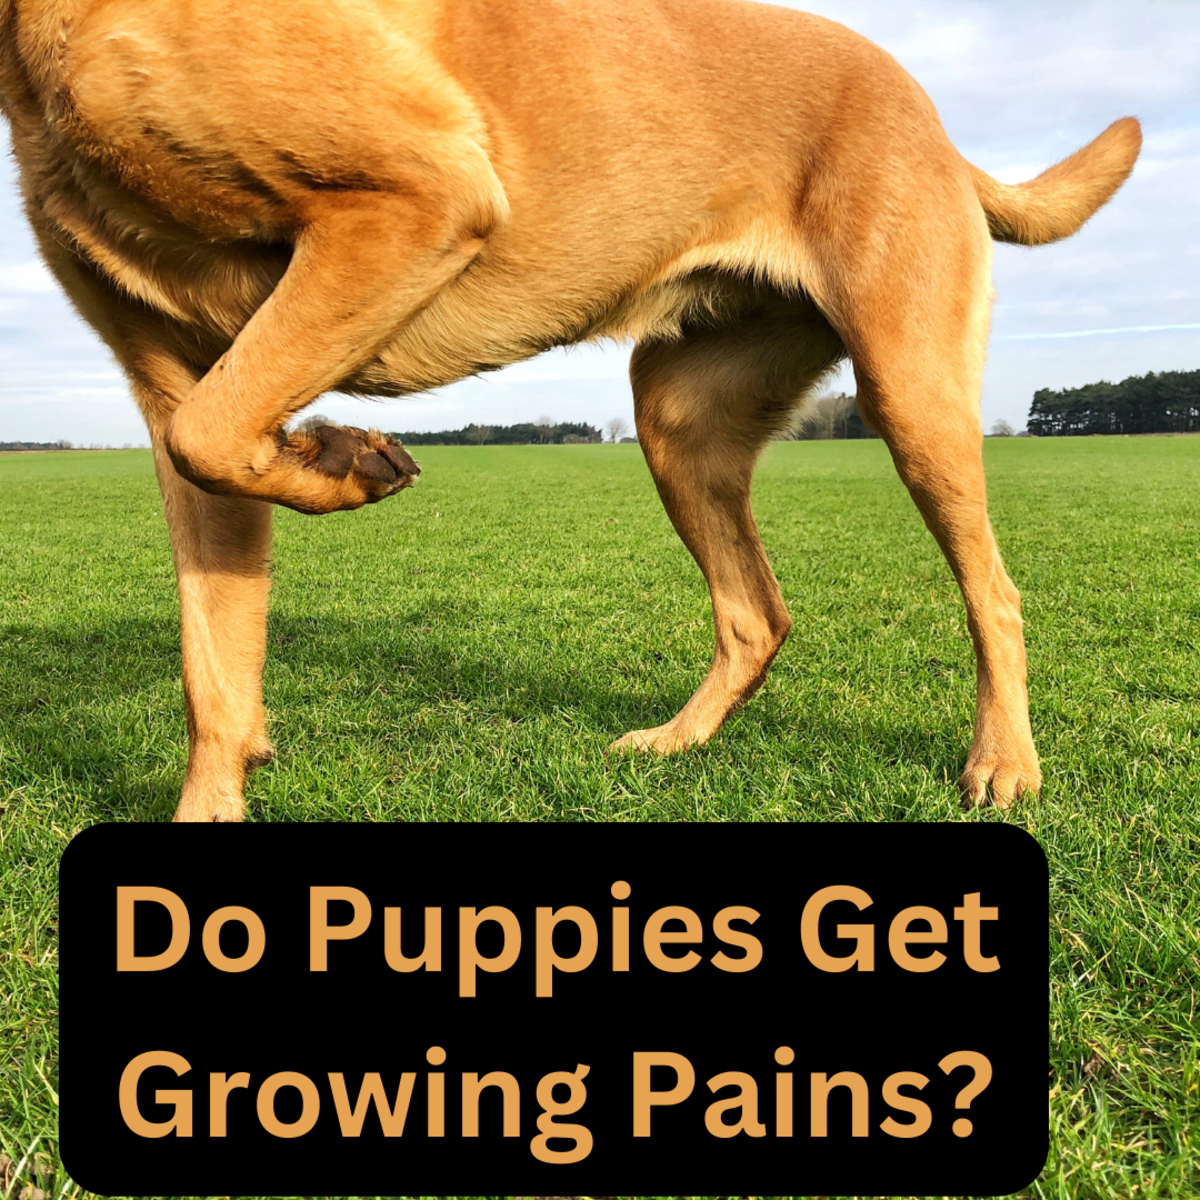 Do Puppies Get Growing Pains?